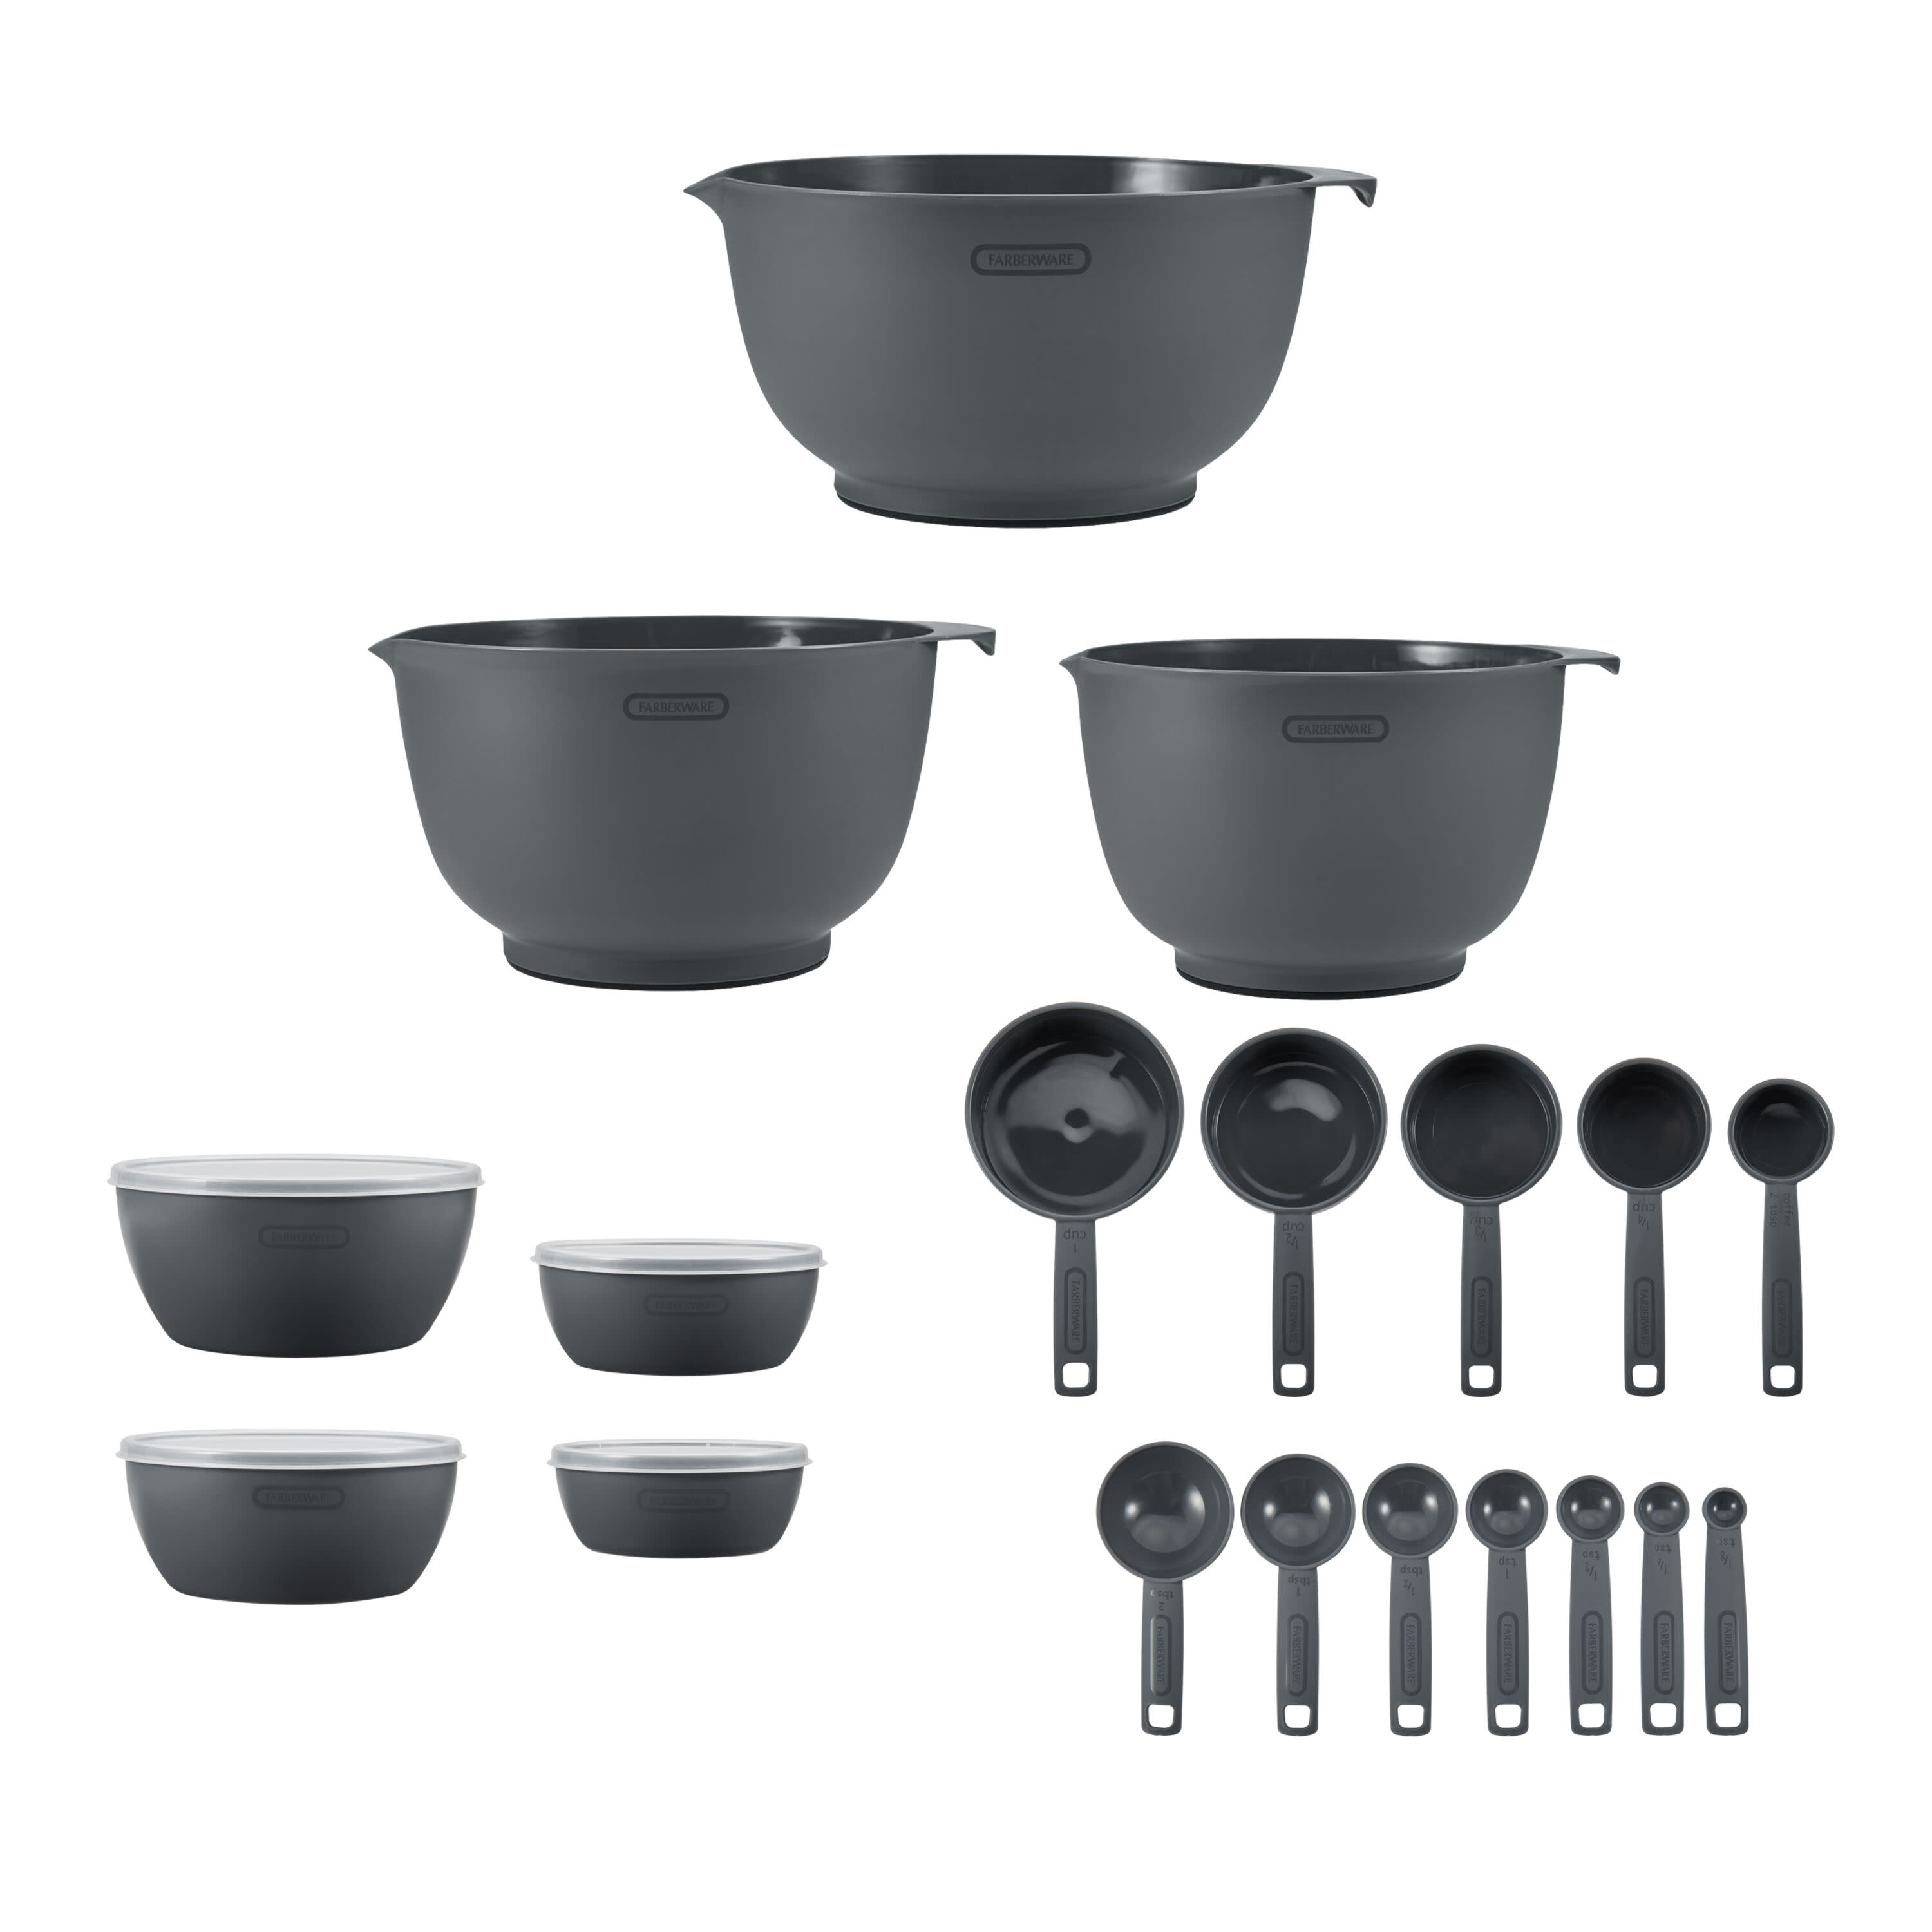 Farberware Professional 23-piece Gray Mix and Measure Baking Set - image 1 of 9